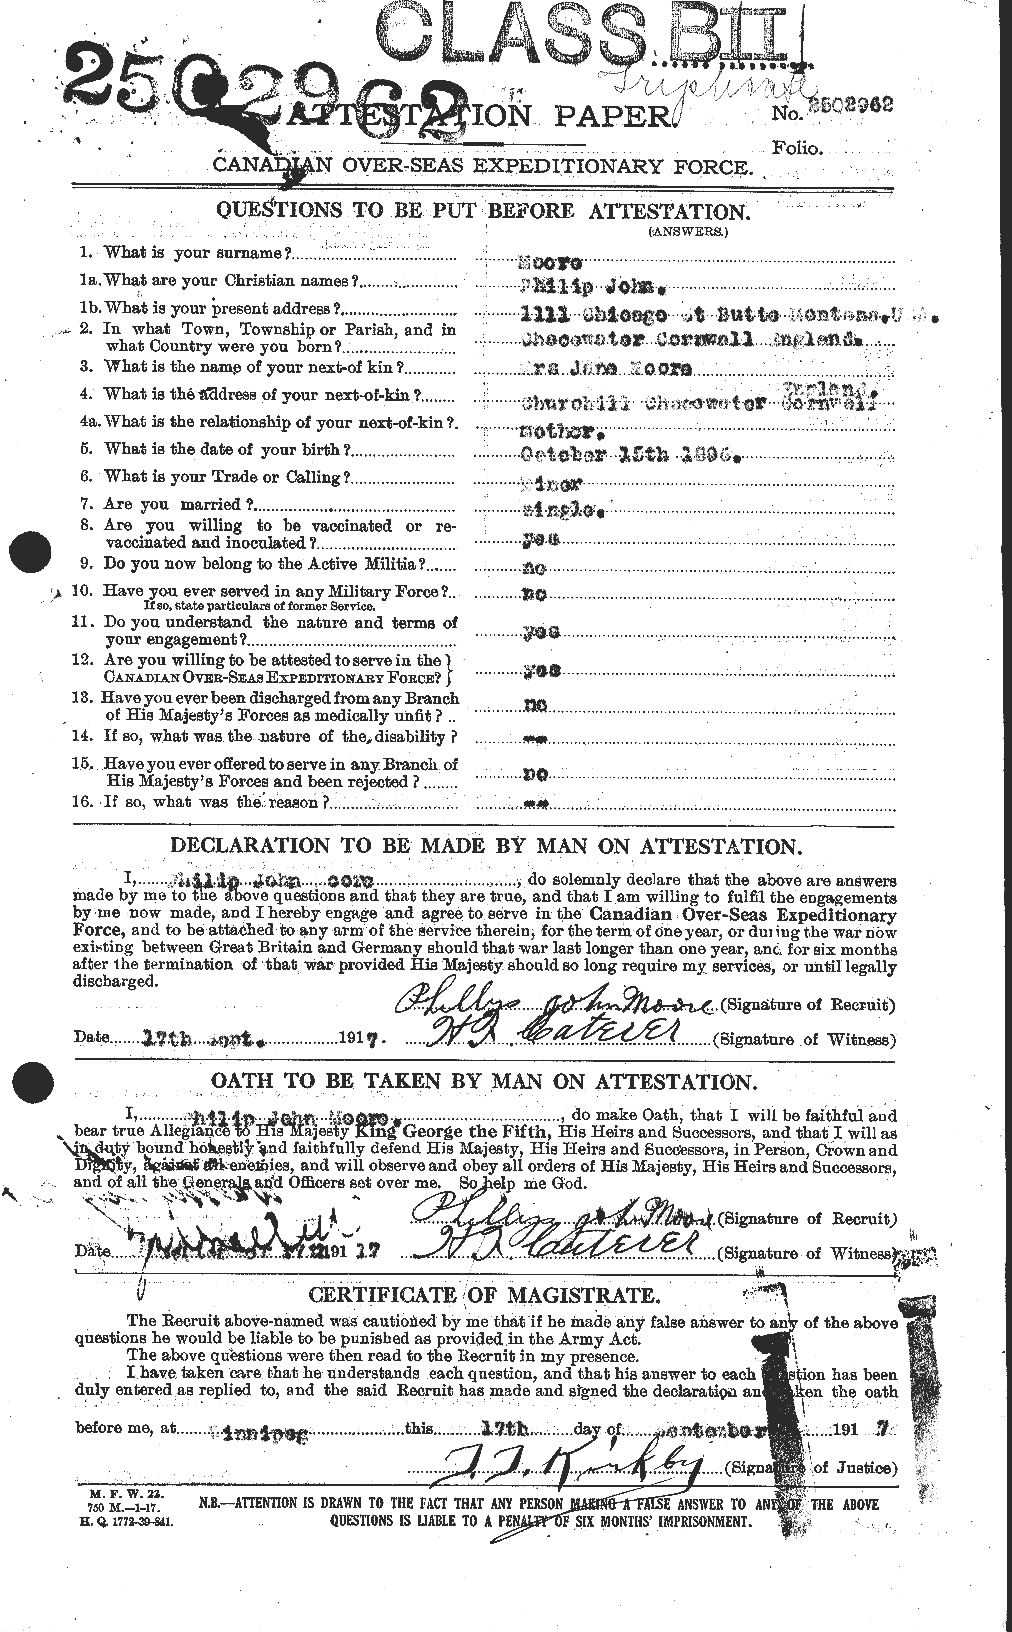 Personnel Records of the First World War - CEF 503500a